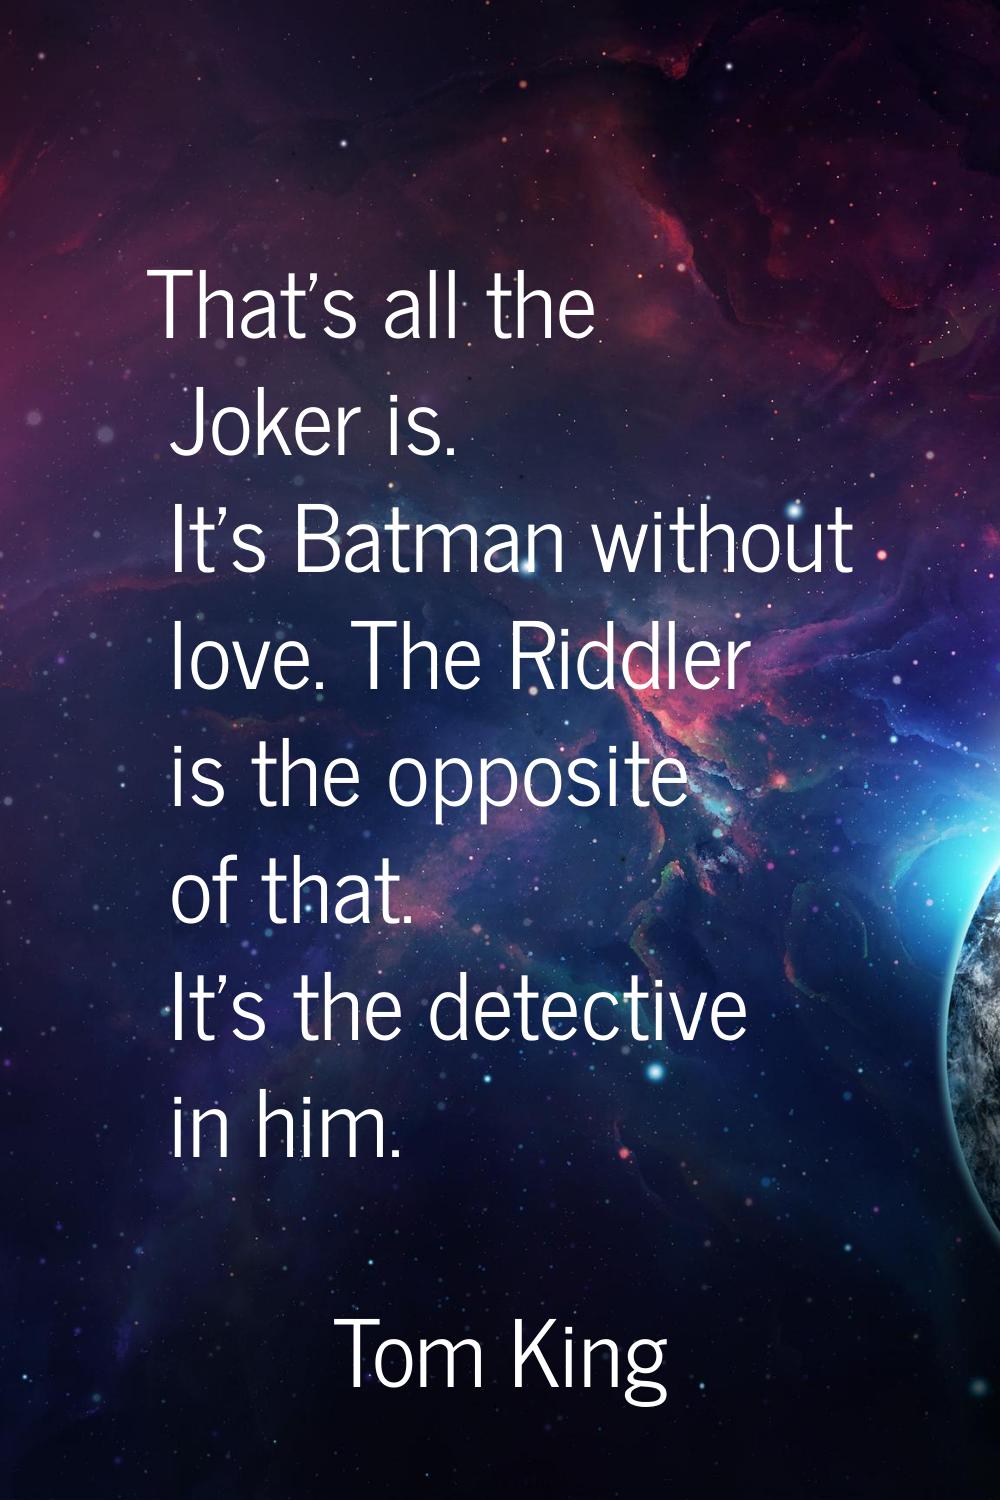 That's all the Joker is. It's Batman without love. The Riddler is the opposite of that. It's the de